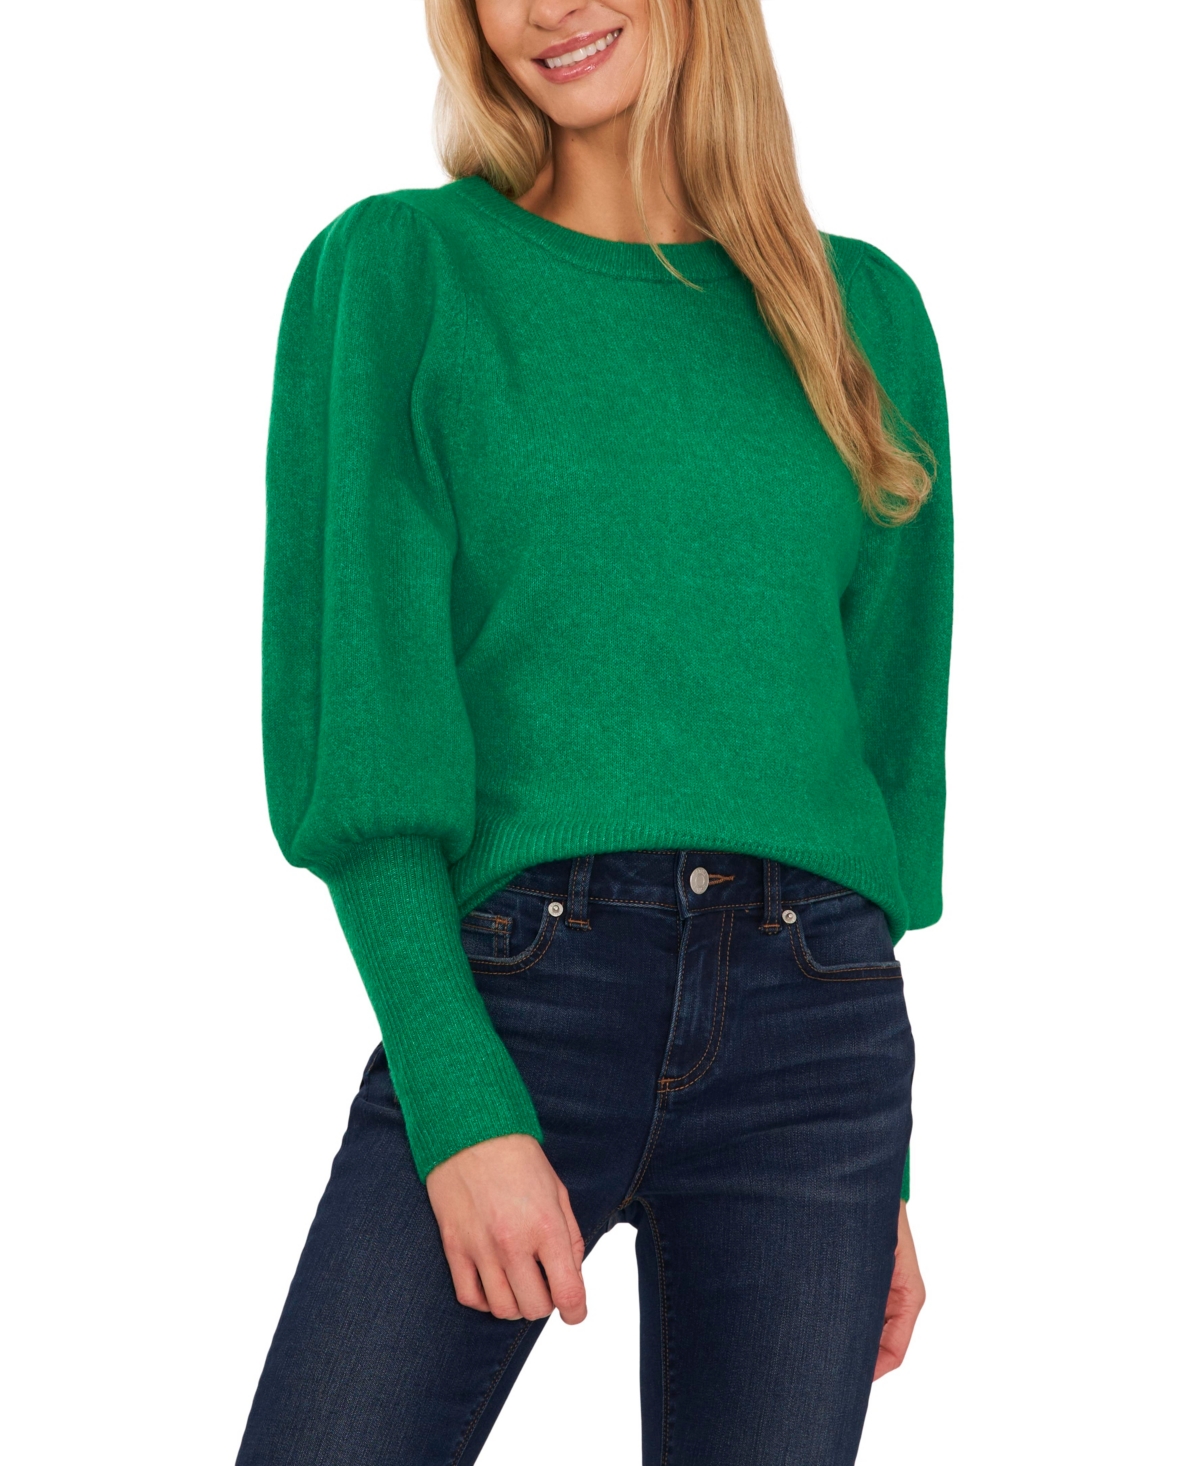 Edwardian Blouses |  Lace Blouses, Sweaters, Vests CeCe Womens Puff Long Sleeve Crew Neck Sweater - Electric Green $34.50 AT vintagedancer.com